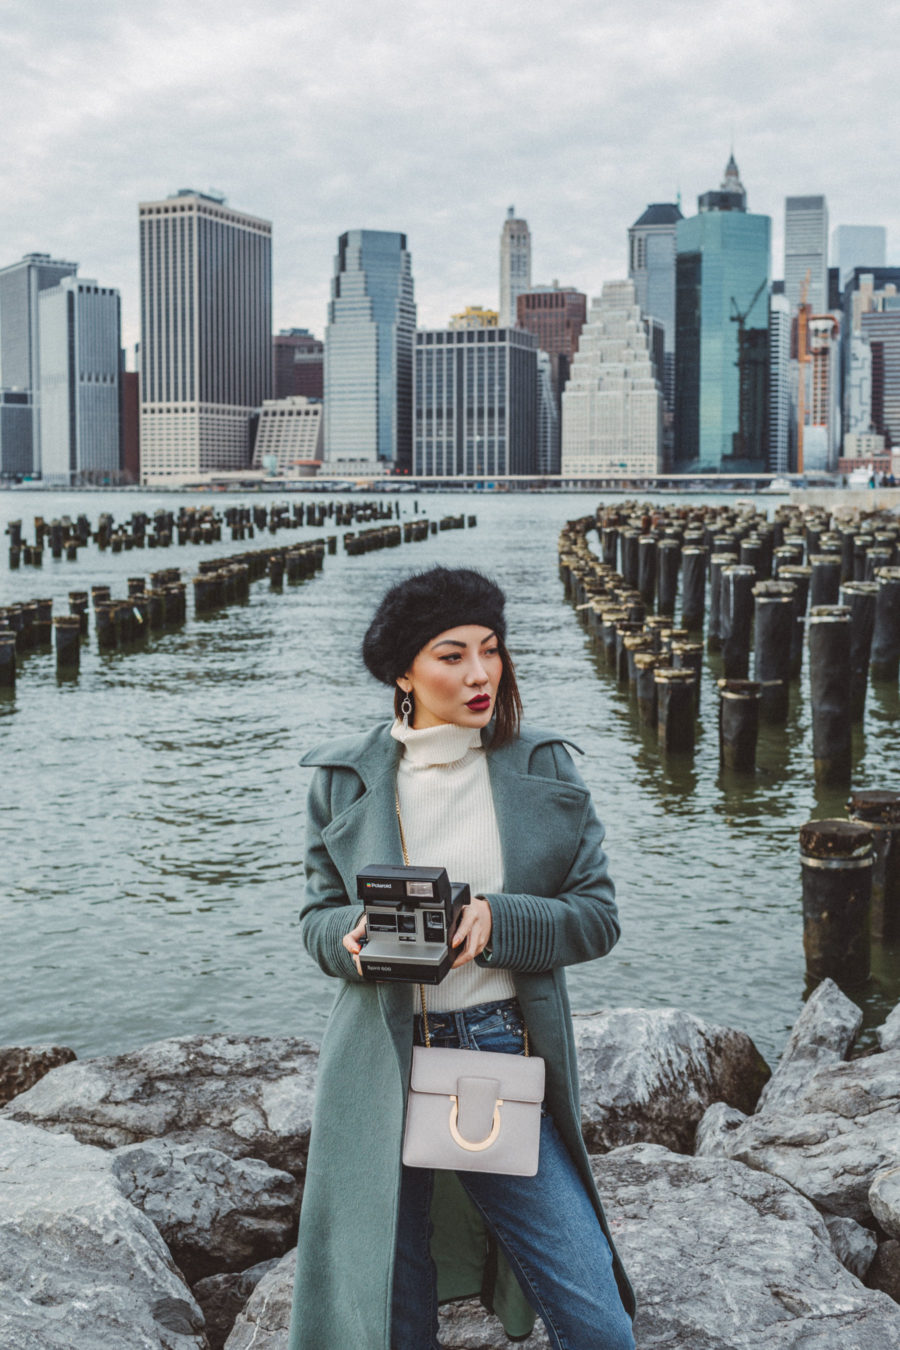 fall wardrobe must haves, Cozy Layered looks, jessica wang, fashion blogger, new york fashion blogger, street style fashion, ootd, asian blogger, parisian chic outfit, beret outfit, how to wear a beret, beret styling, chic winter style, new york fashion // Notjessfashion.com